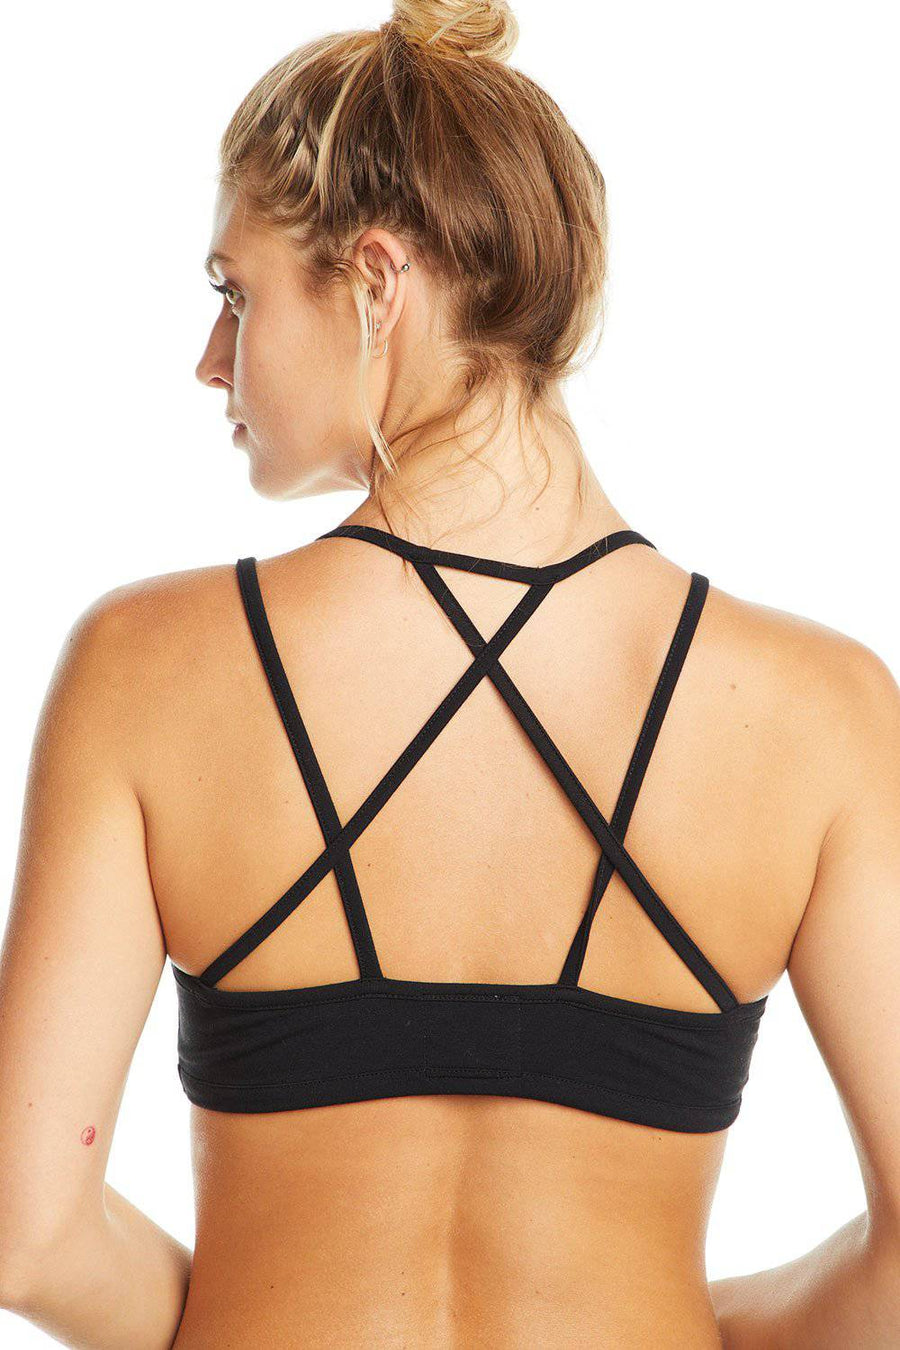 QUADRABLEND STRAPPY CROSS BACK BRALETTE WOMENS chaserbrand